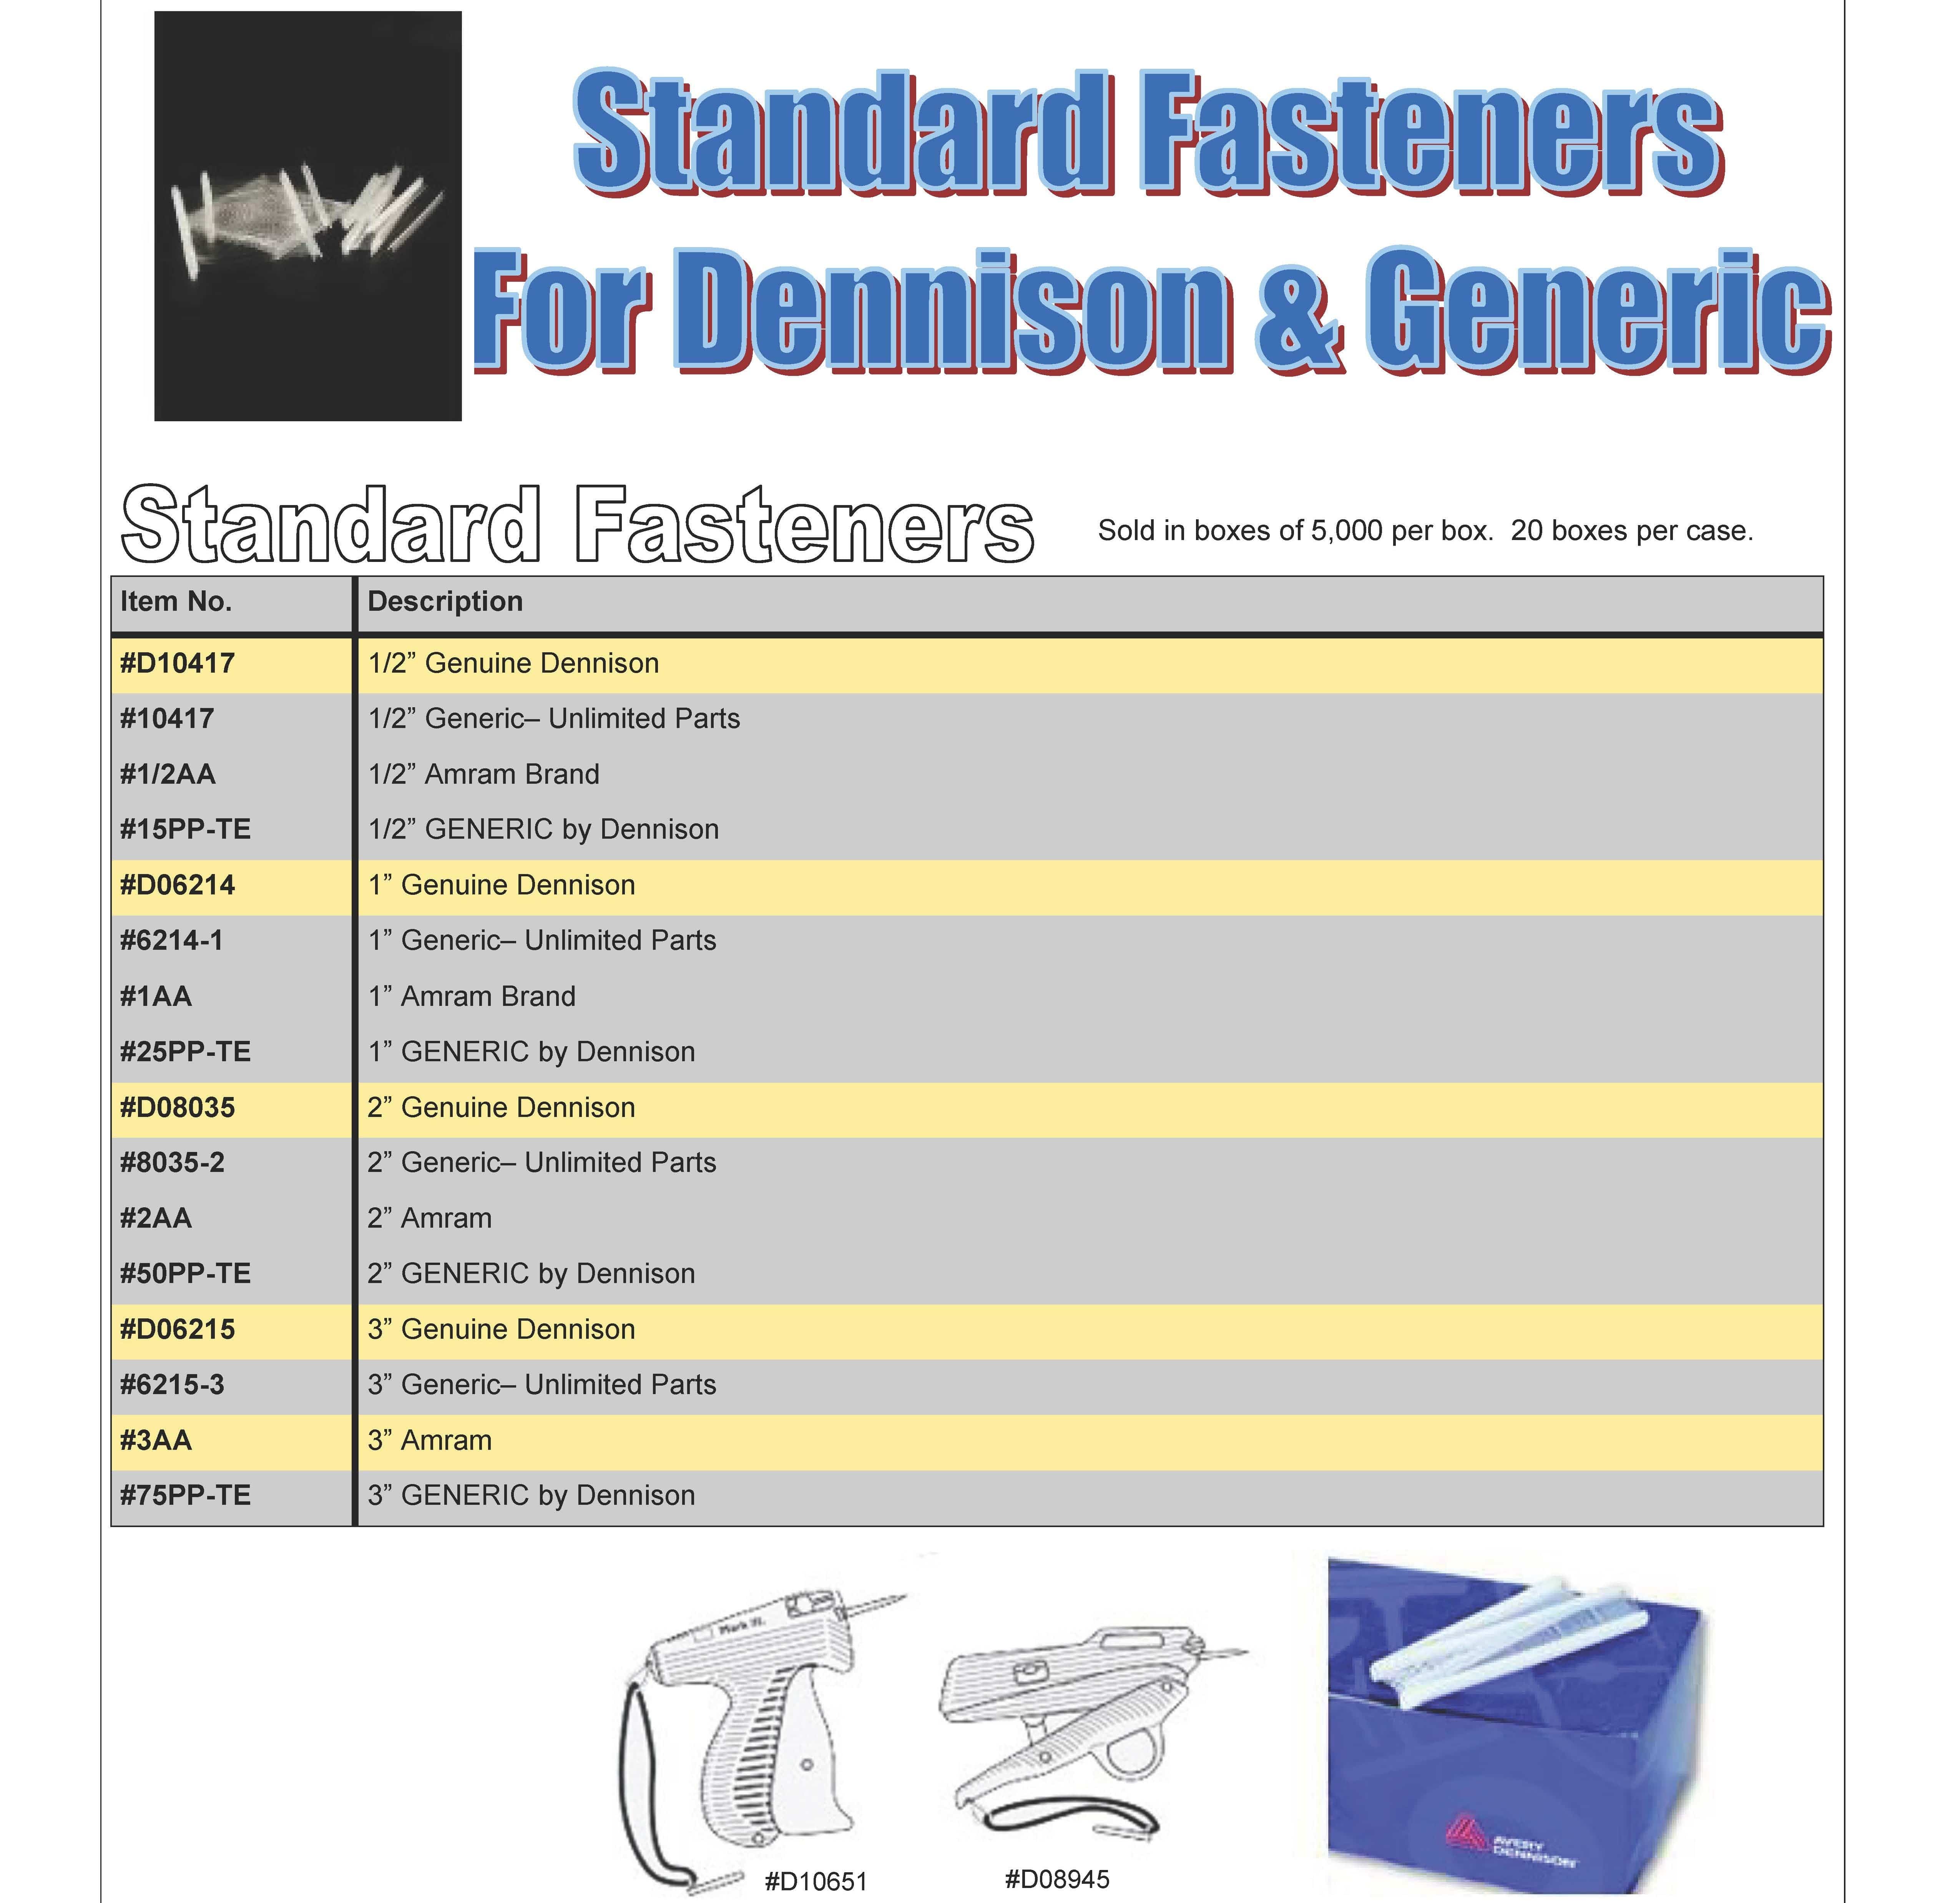 AVERY DENNISON and GENRIC STANDARD FASTENERS